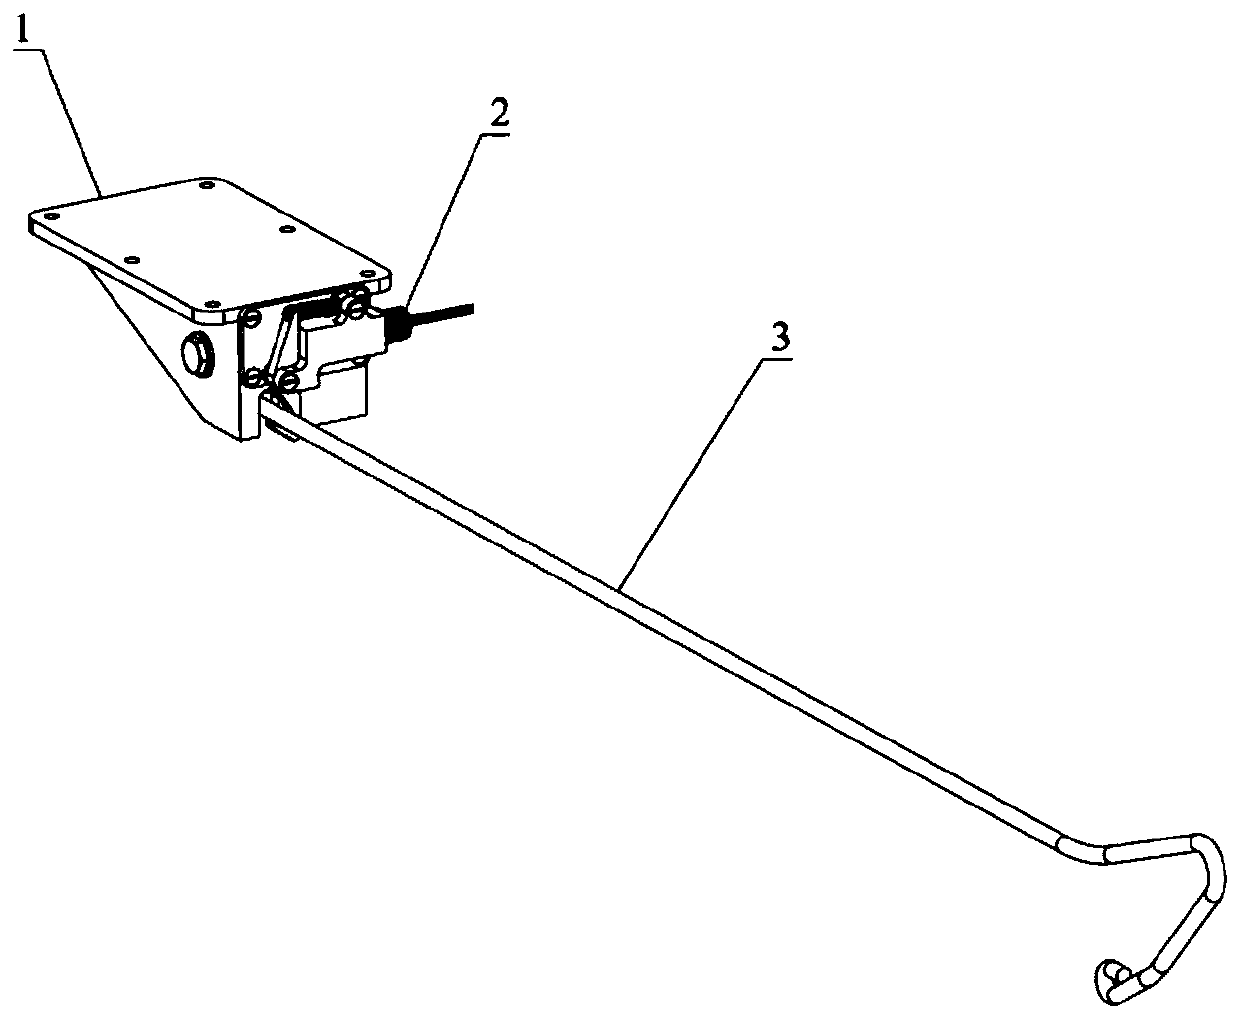 Retractable arresting hook device of unmanned aerial vehicle